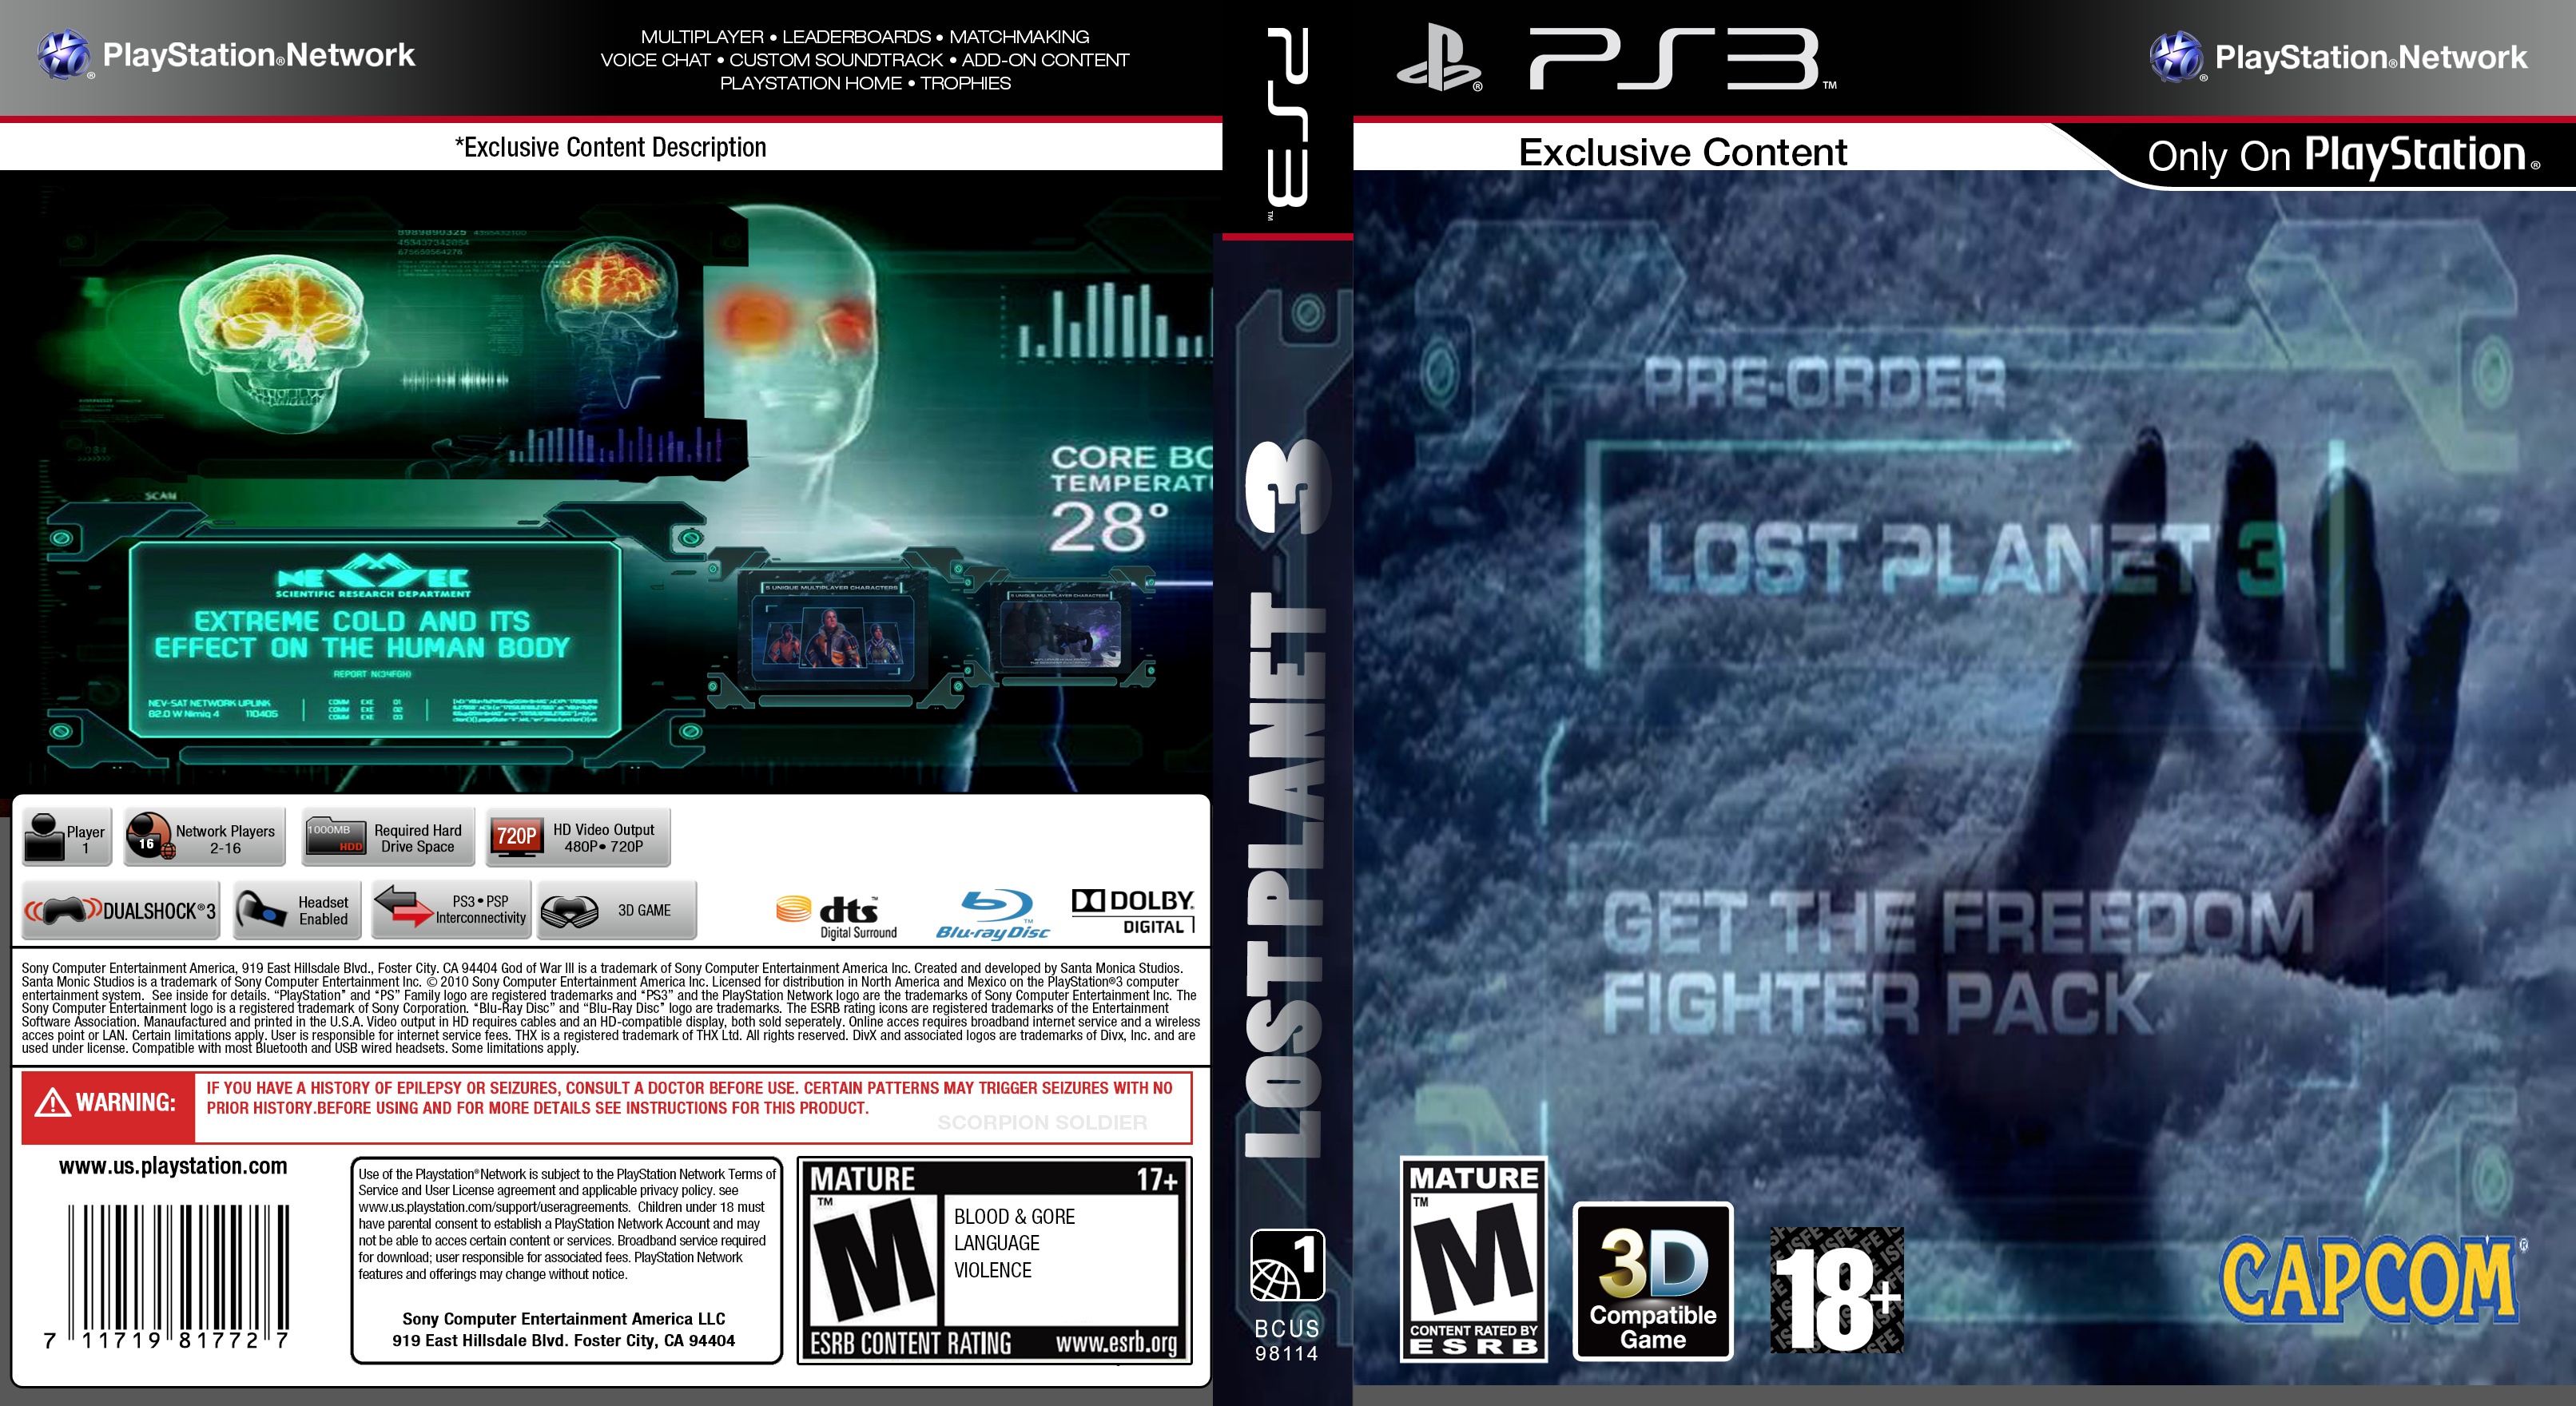 Lost planet ps3. Lost Planet 3 [Xbox 360]. Диск ПС 3 лост планет. Lost Planet 3 (ps3). Игра Lost Planet 3 для ps3.